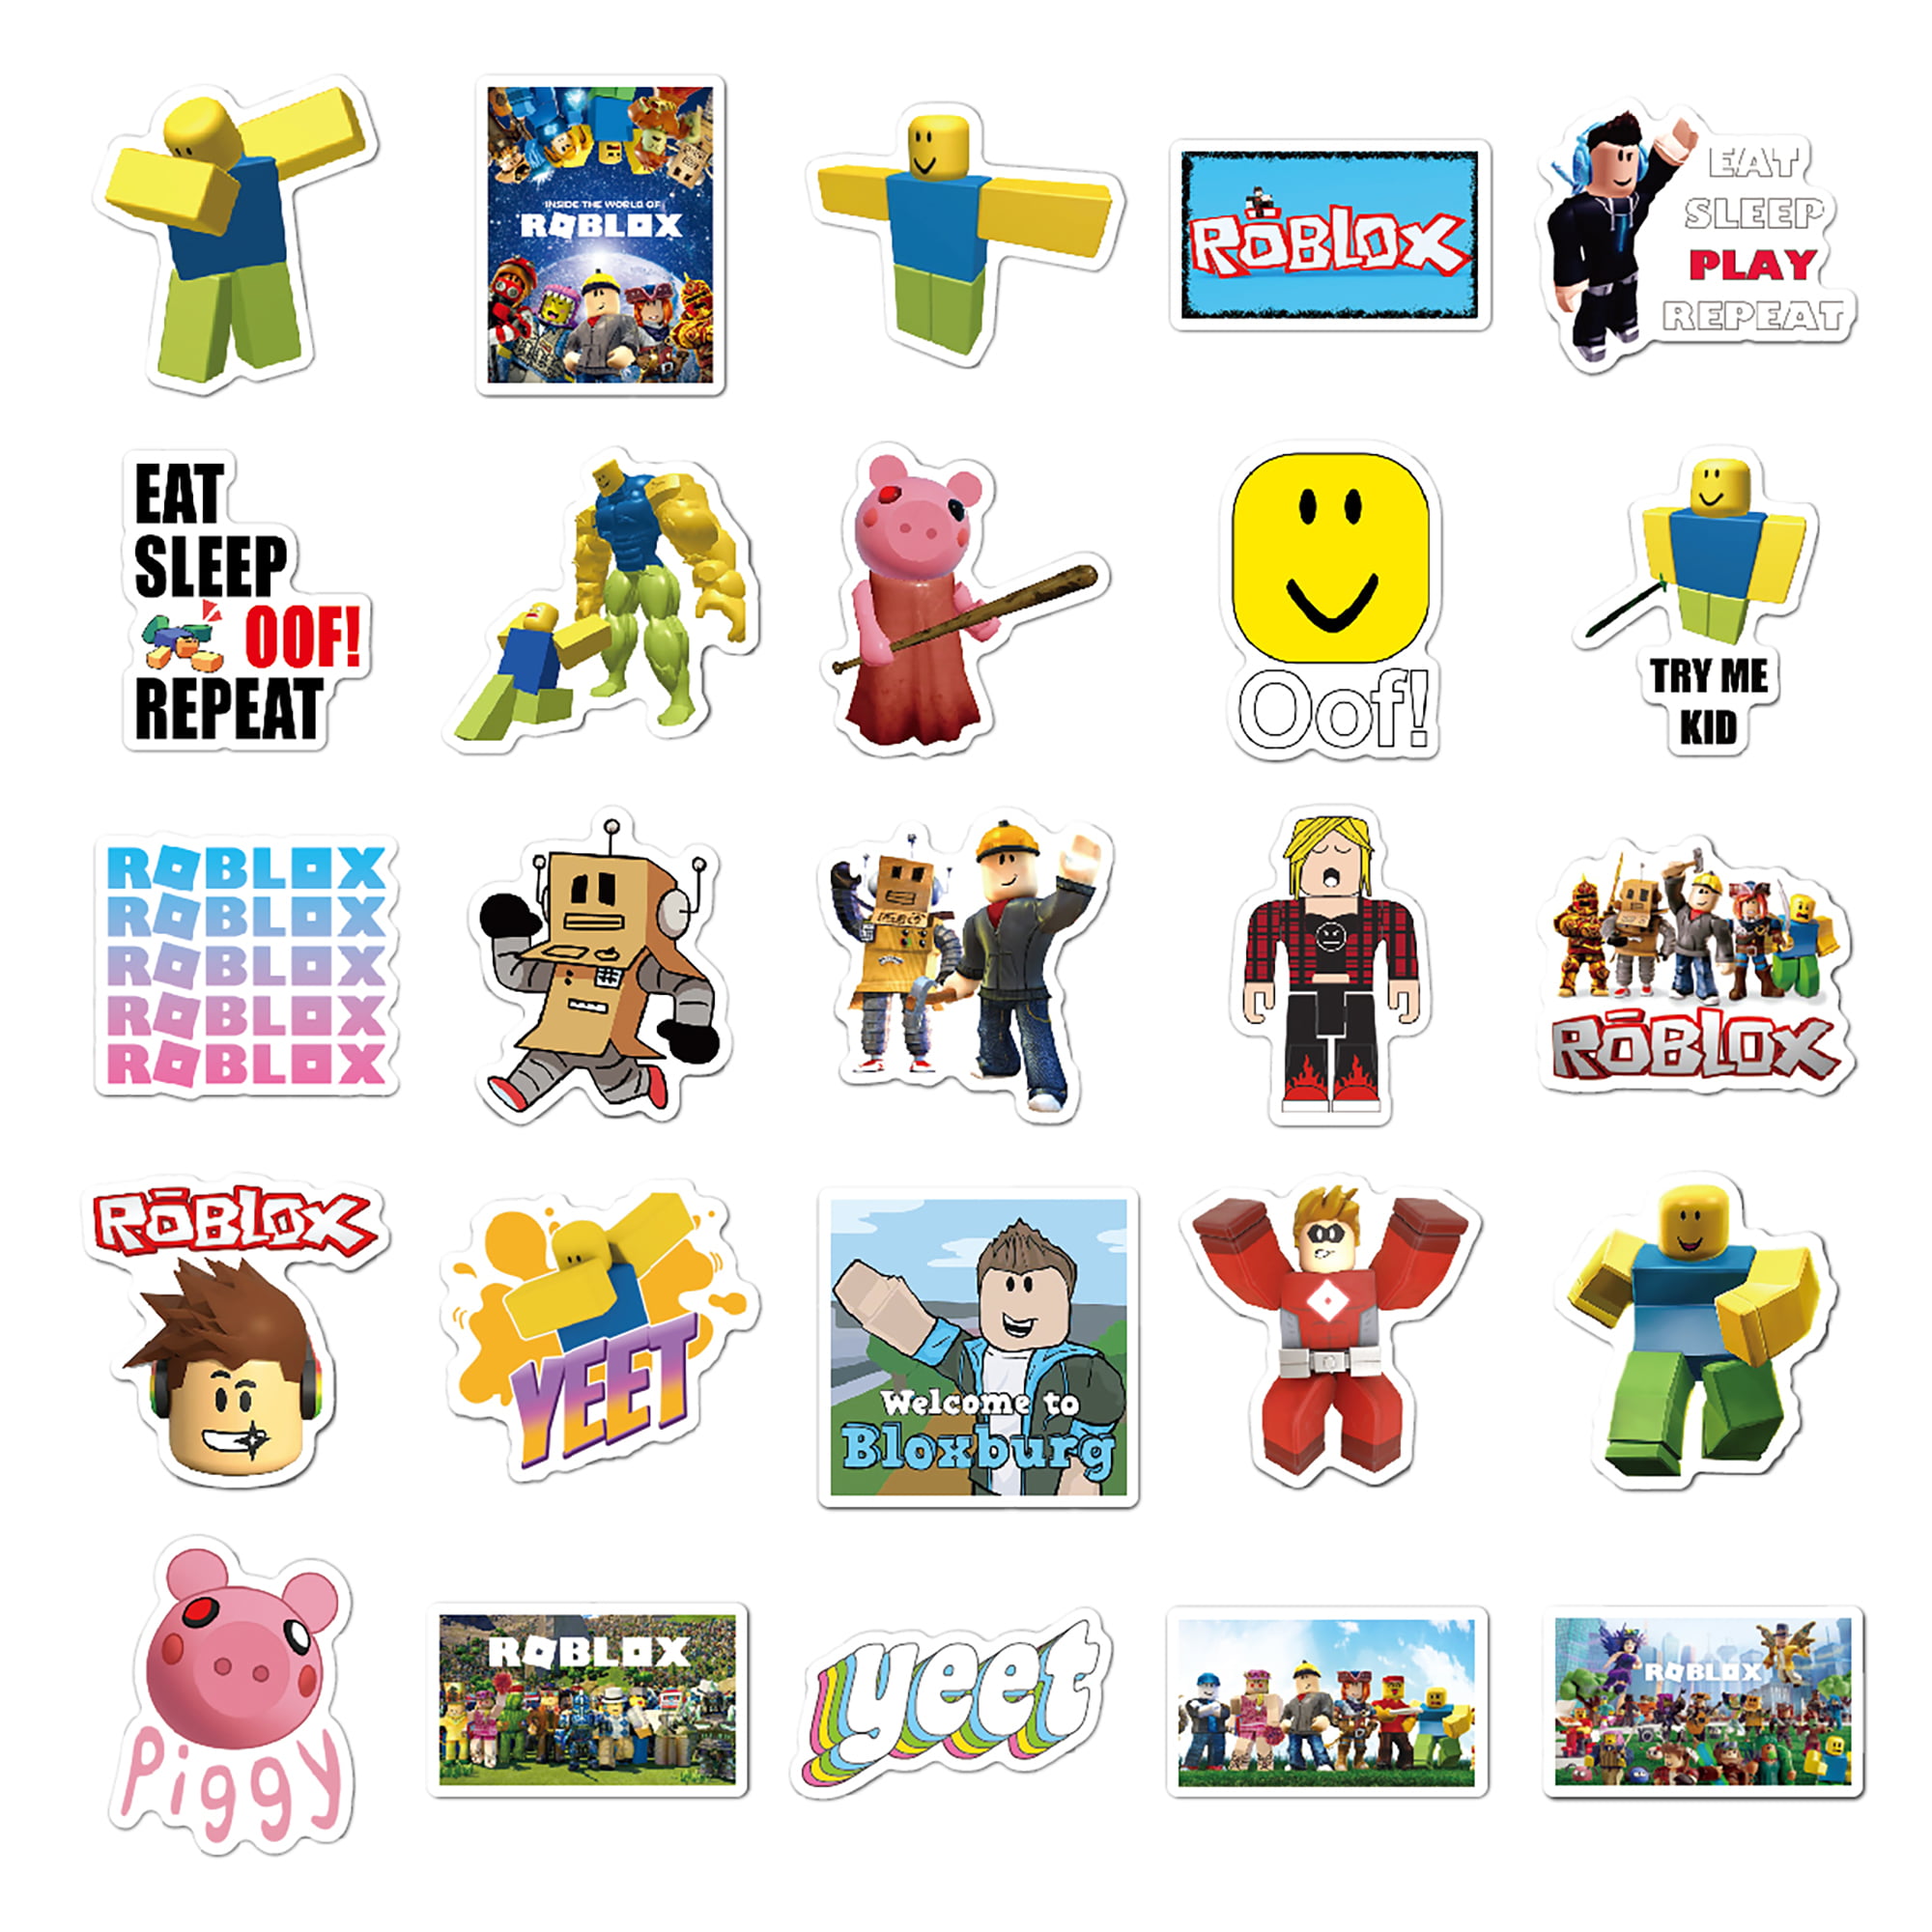 Roblox Sticker Pack 100pcs Sticker Decals Best Gift For Kids Children Teens Waterproof Online Gaming Stickers Pack For Home Decor Phone Hydro Flasks Water Bottle Bicycle Skateboard Laptop Pads Luggage Walmart Com Walmart Com - roblox how to add signs bloxburg